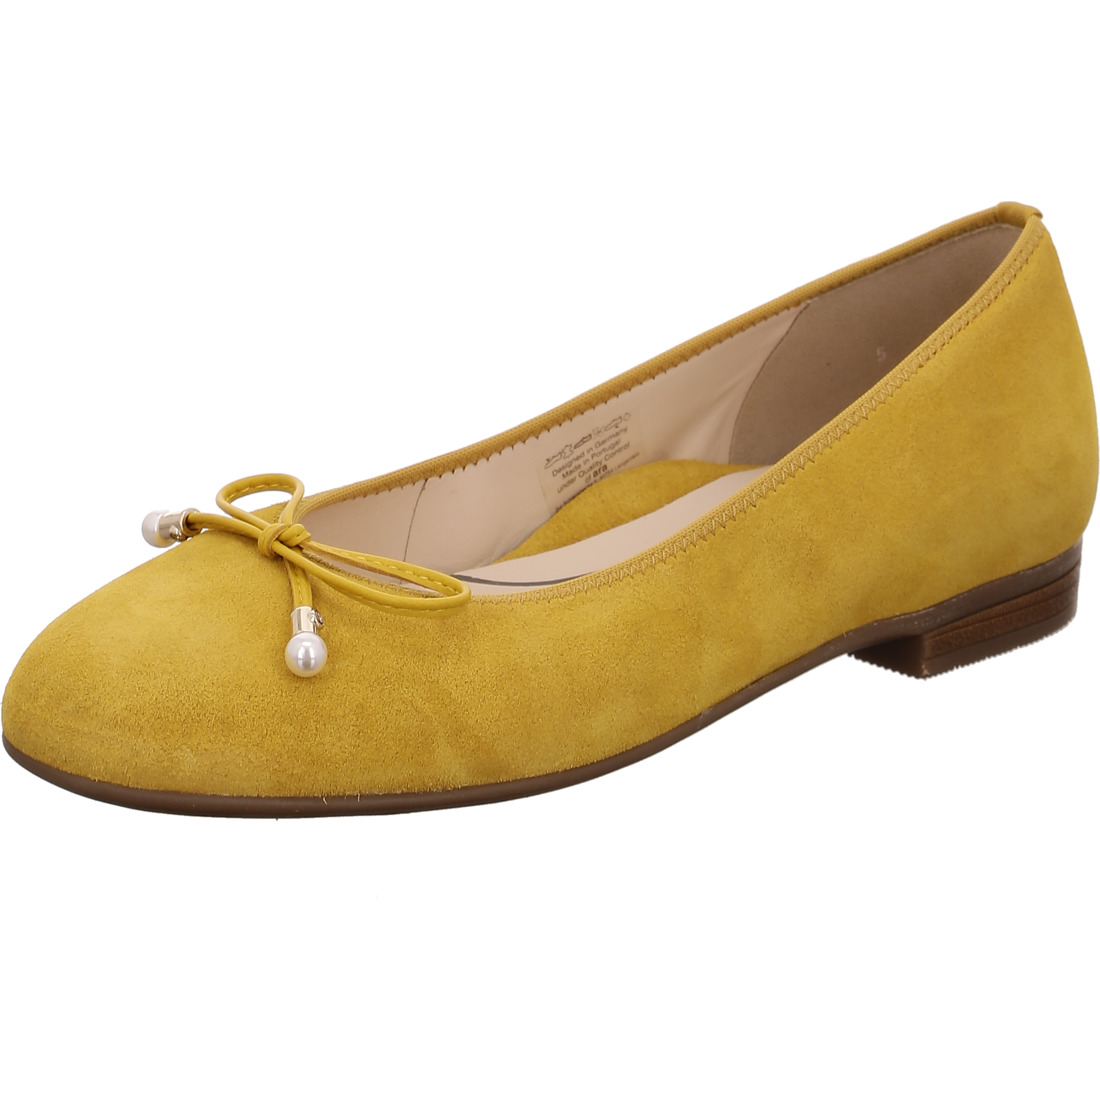 Ballerines*Ara Shoes Ballerines Ballerines Sardinia sole